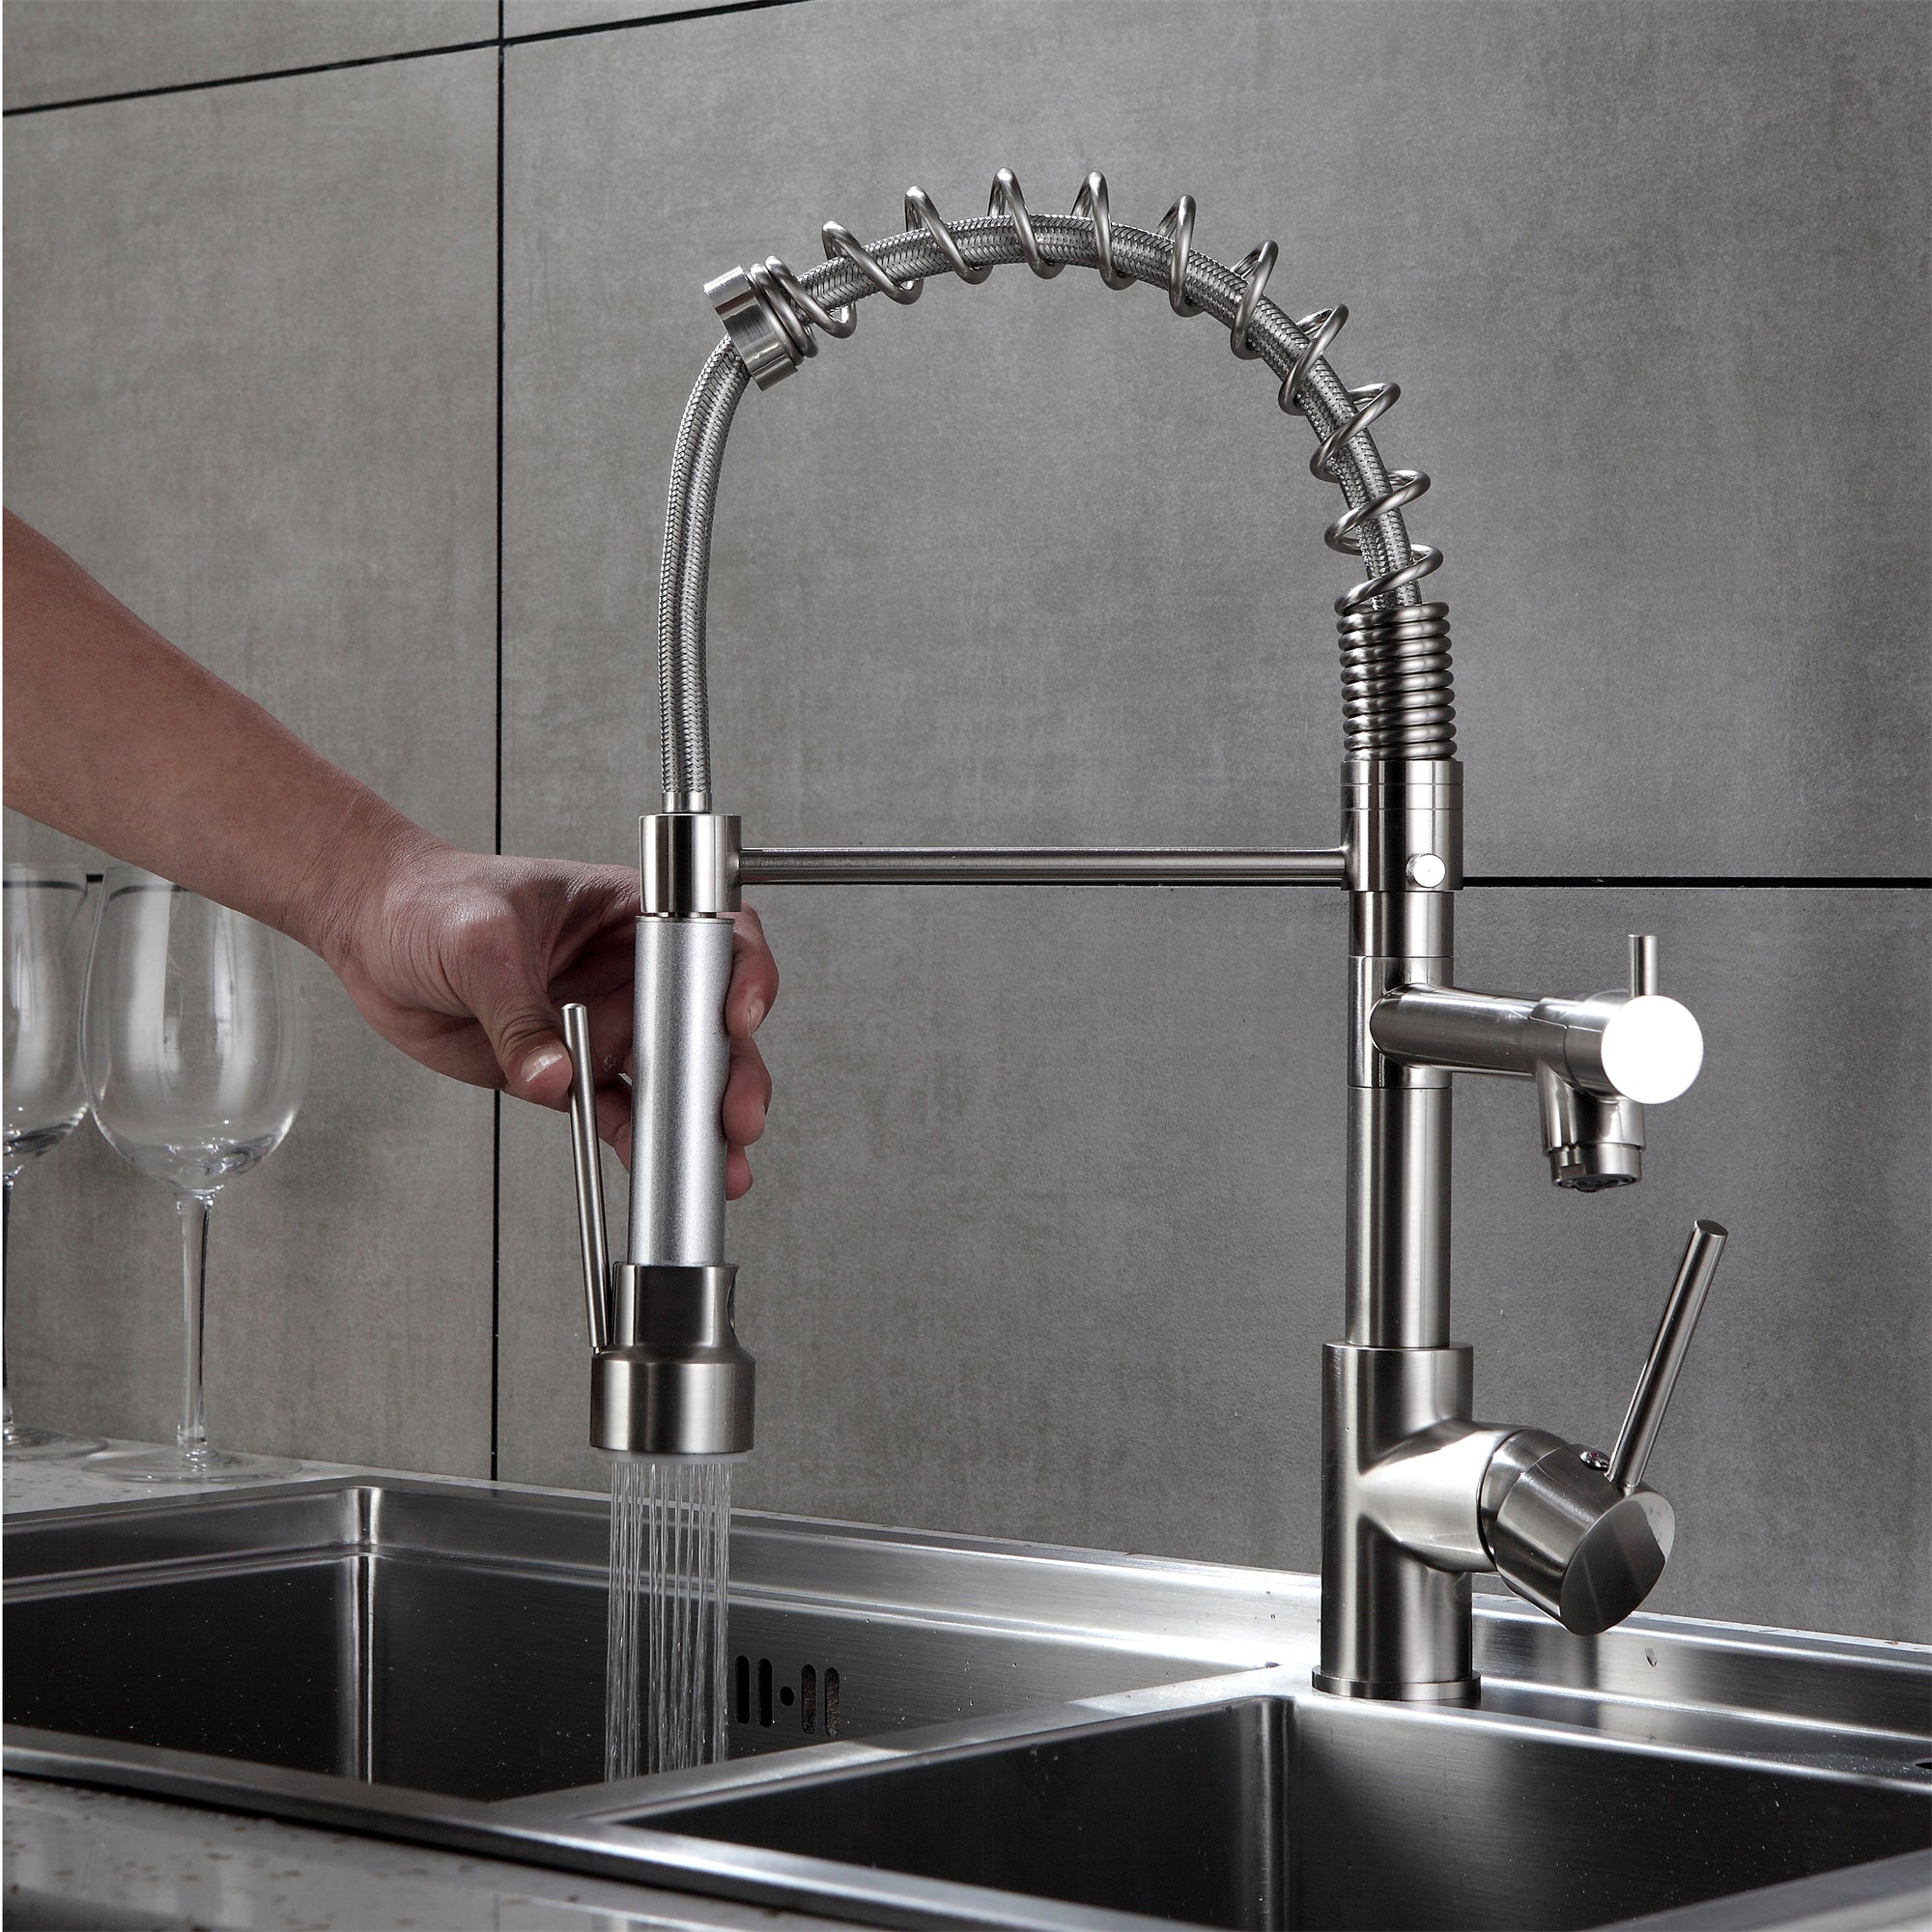 Kitchen Spring Faucets with Pull Down Sprayer-2 Functions Sprayer